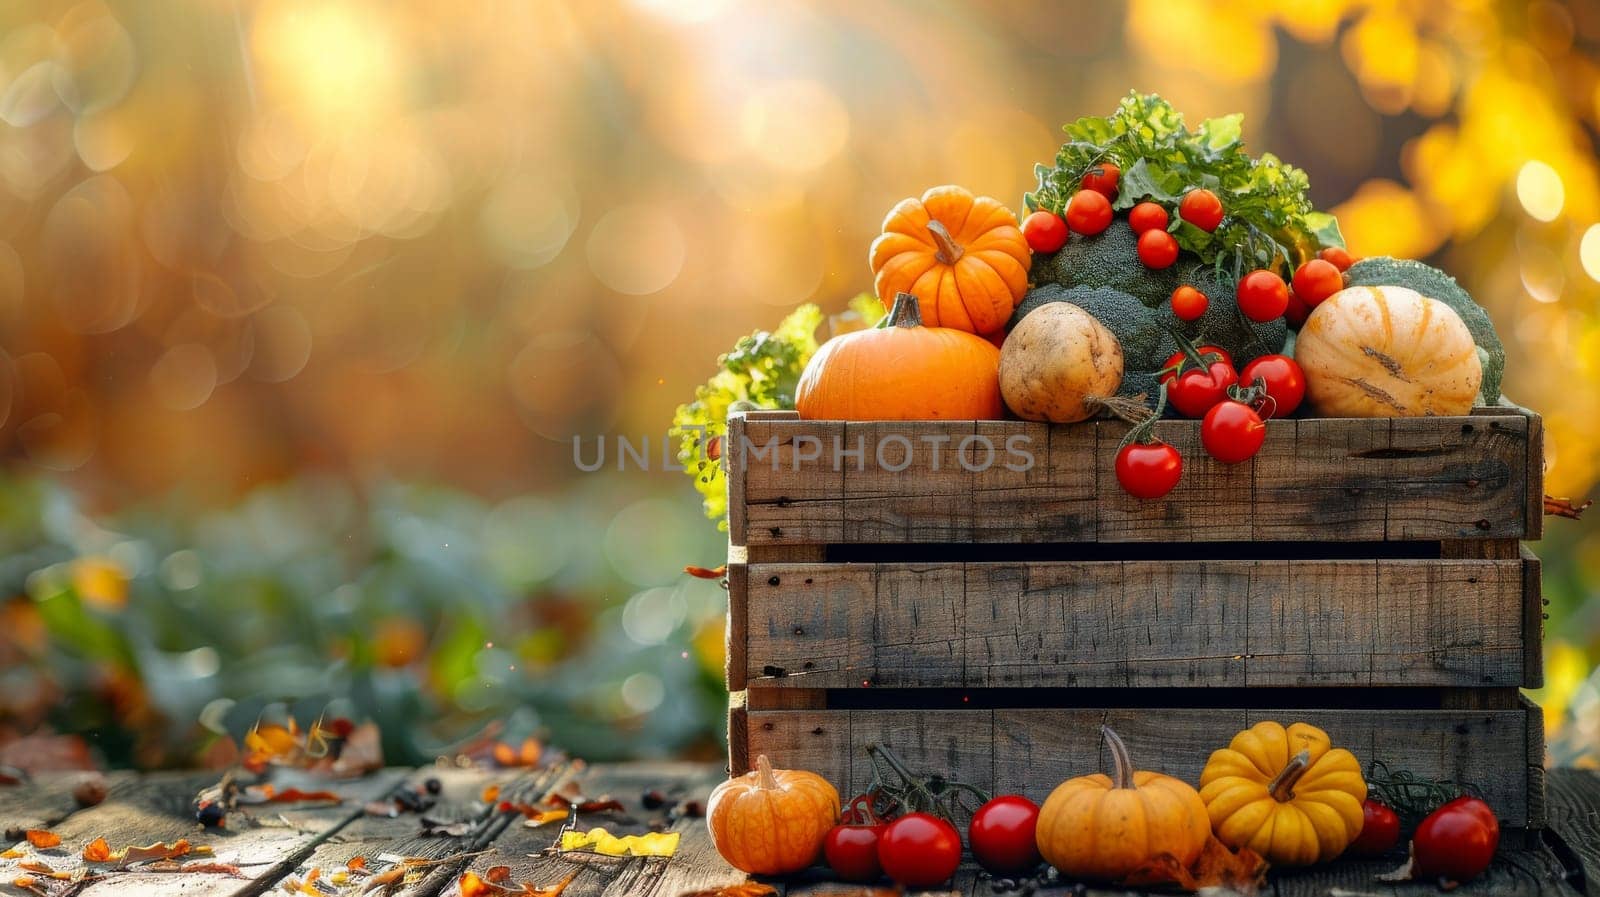 A basket of vegetables including tomatoes broccoli. Health care concept by itchaznong